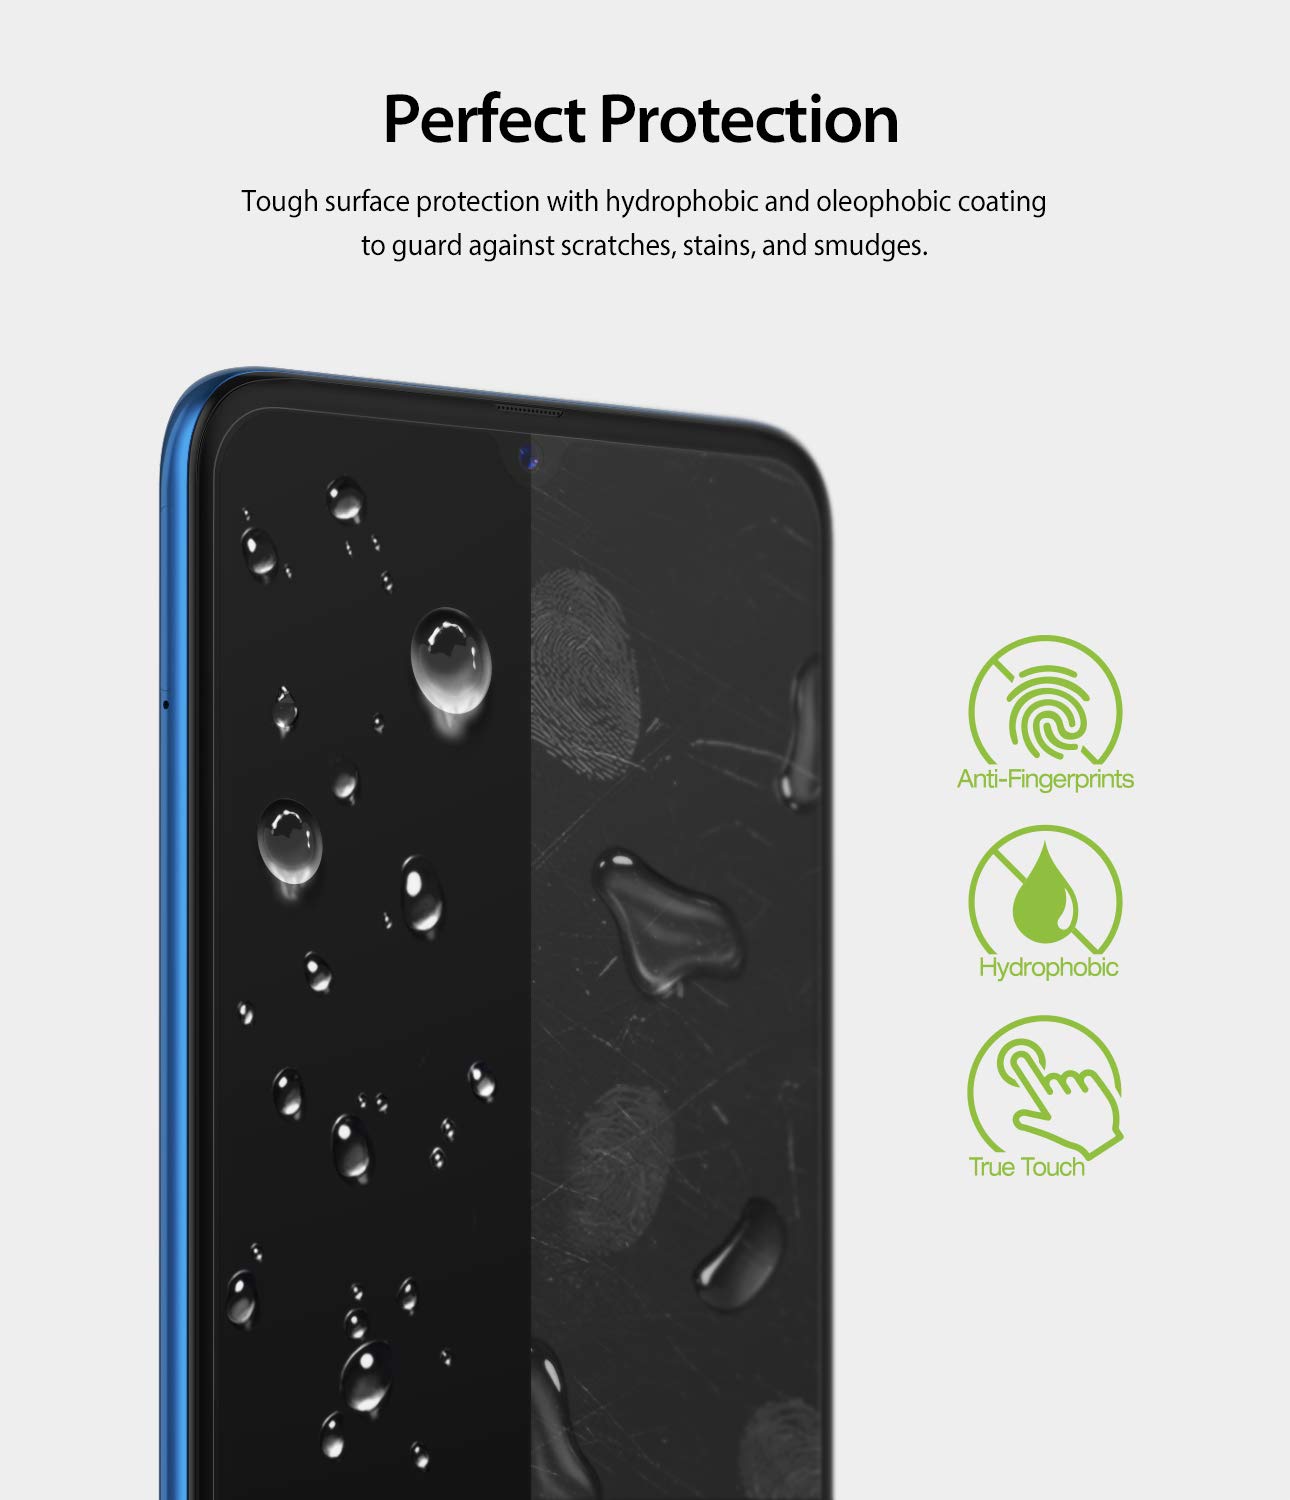 perfect protection with hydrophobic and oleophobic coating